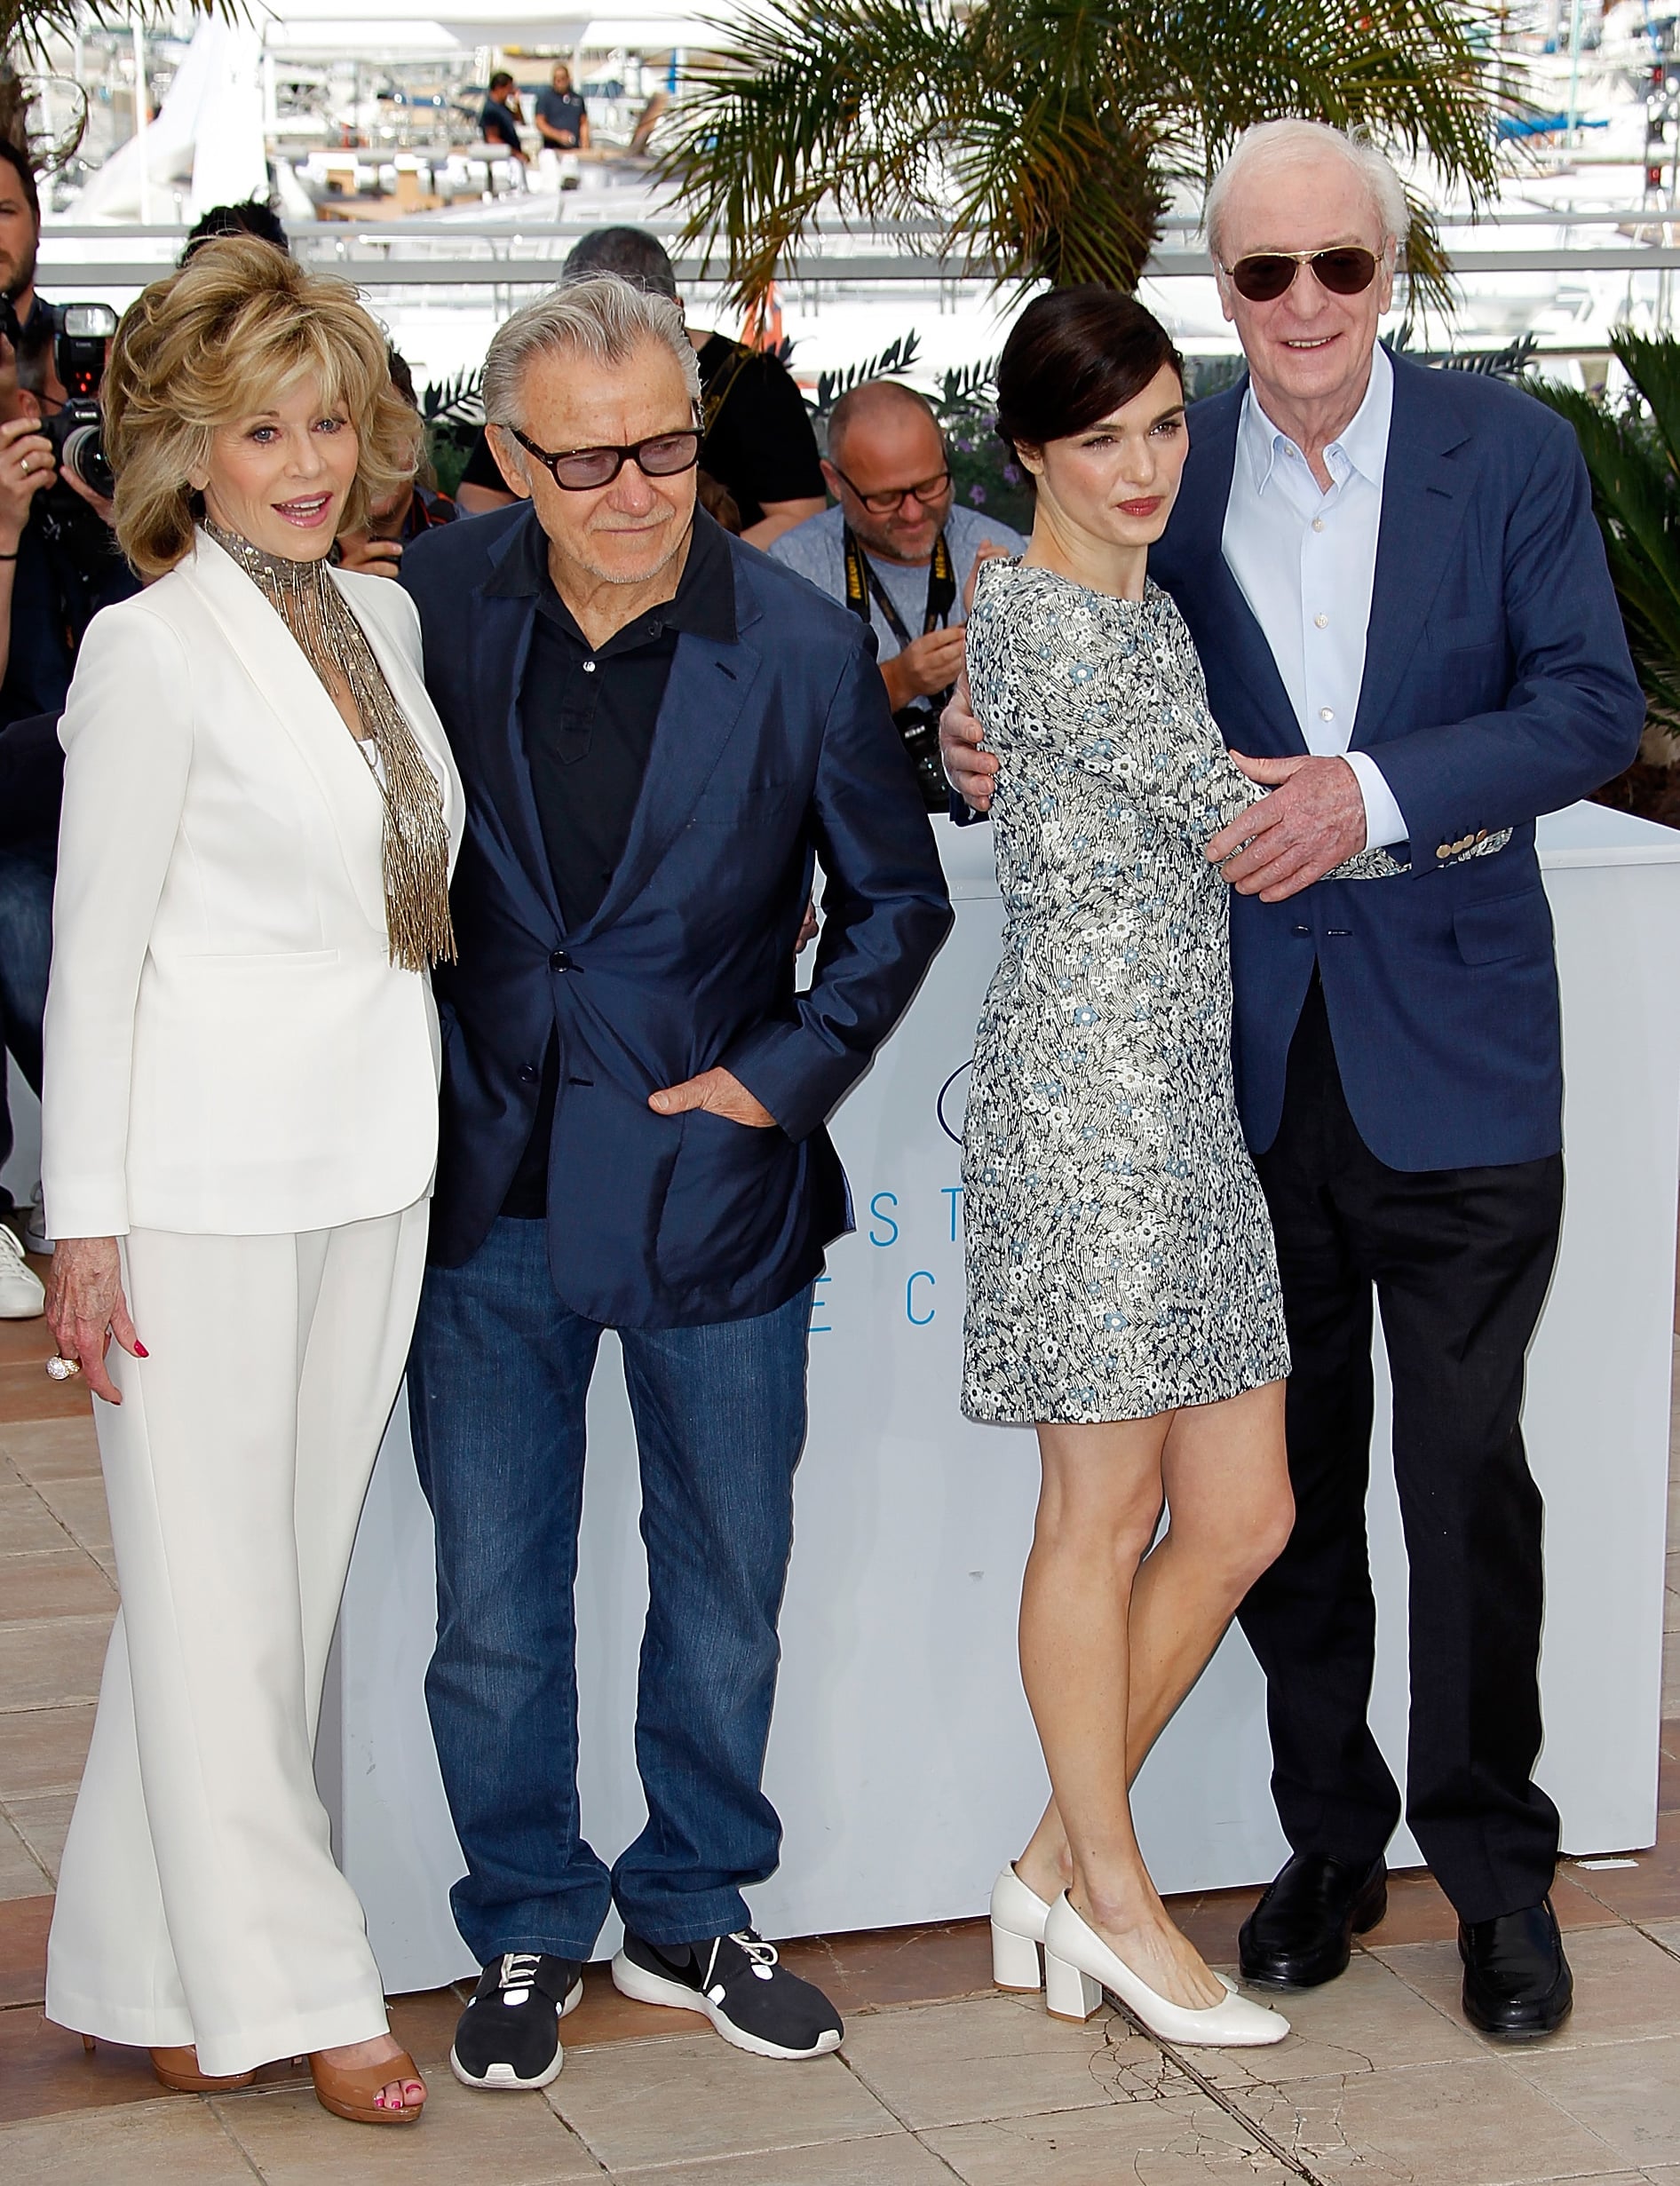 Michael Caine and Jane Fonda Talk Youth Movie at Cannes | POPSUGAR ...